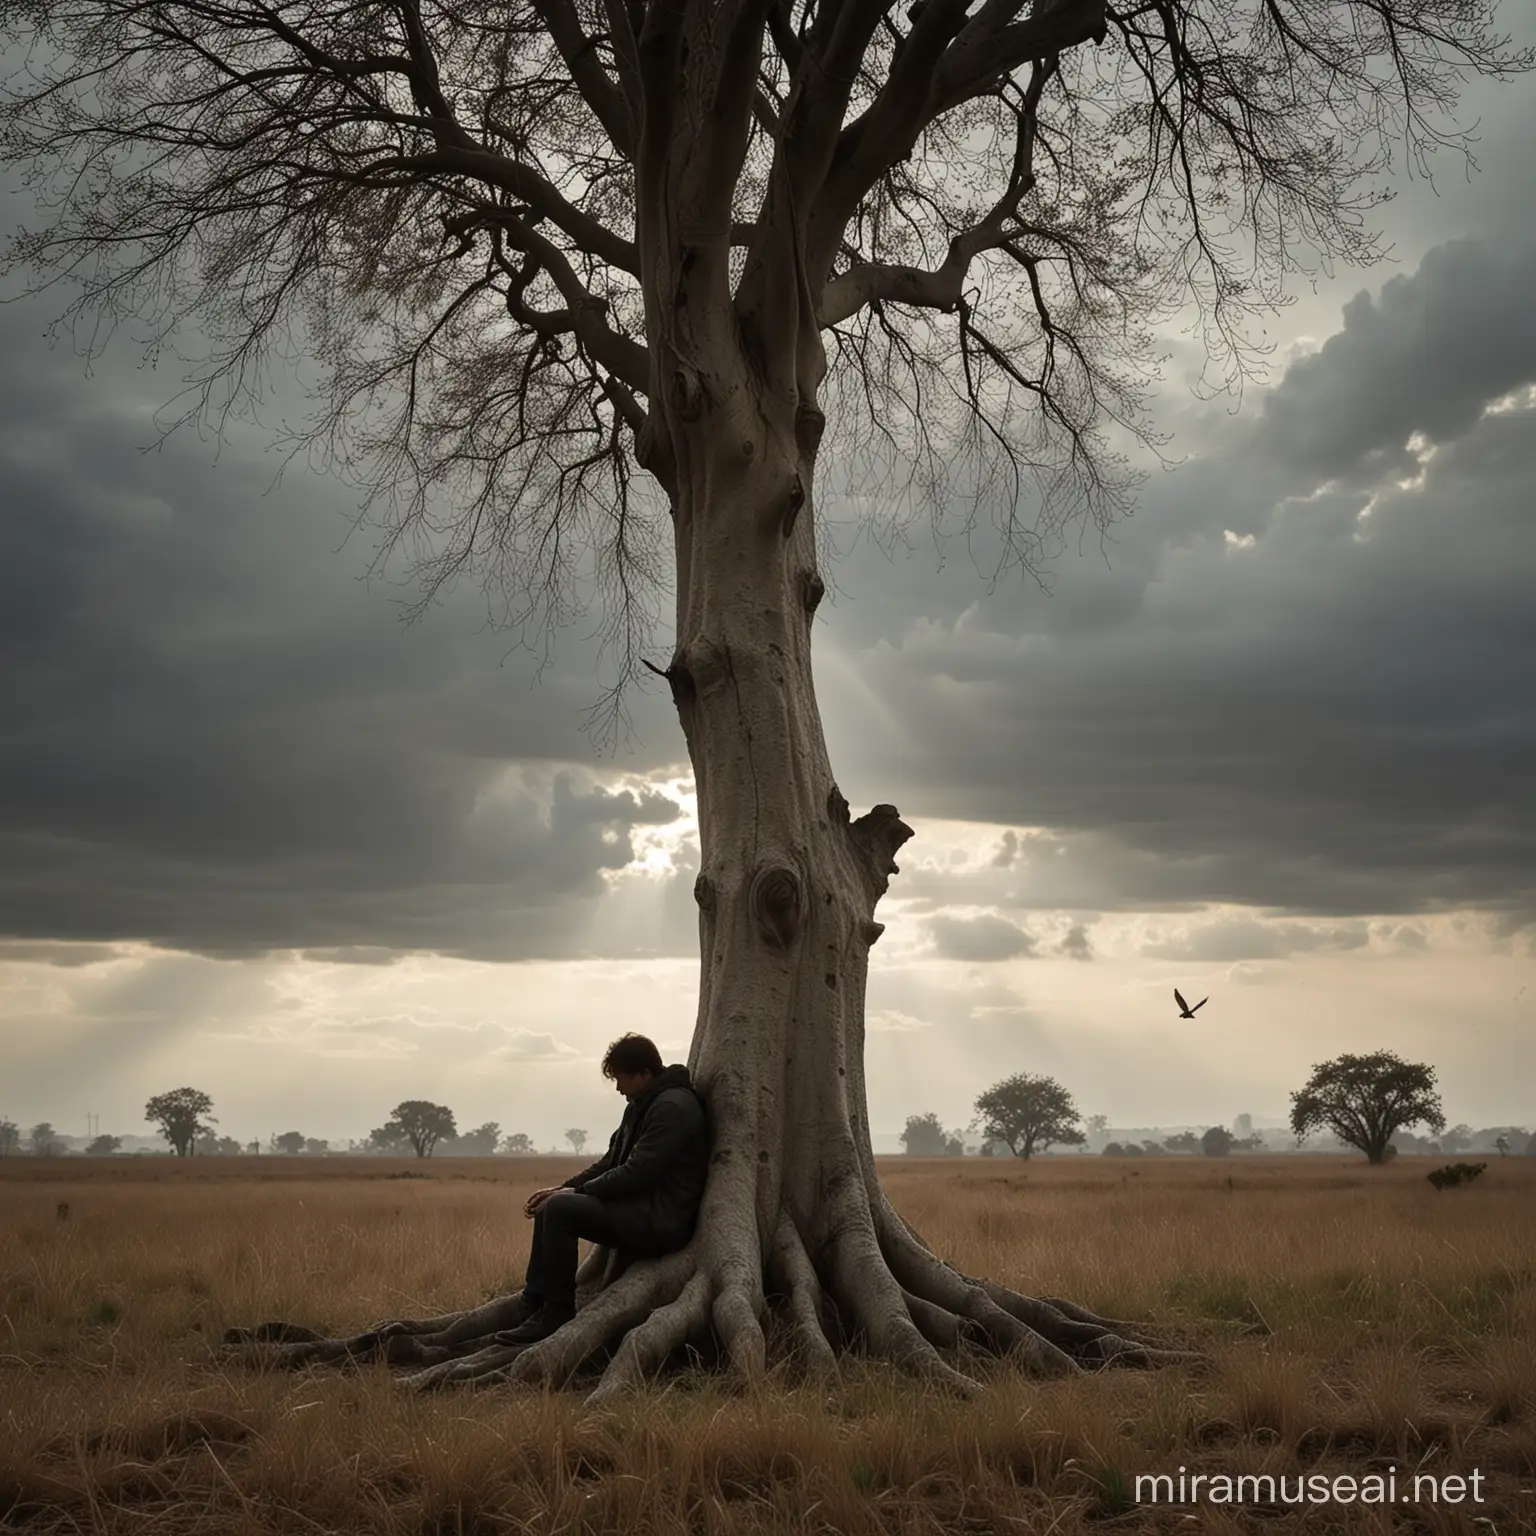 Solitary Man in Contemplation Under a Plane Tree